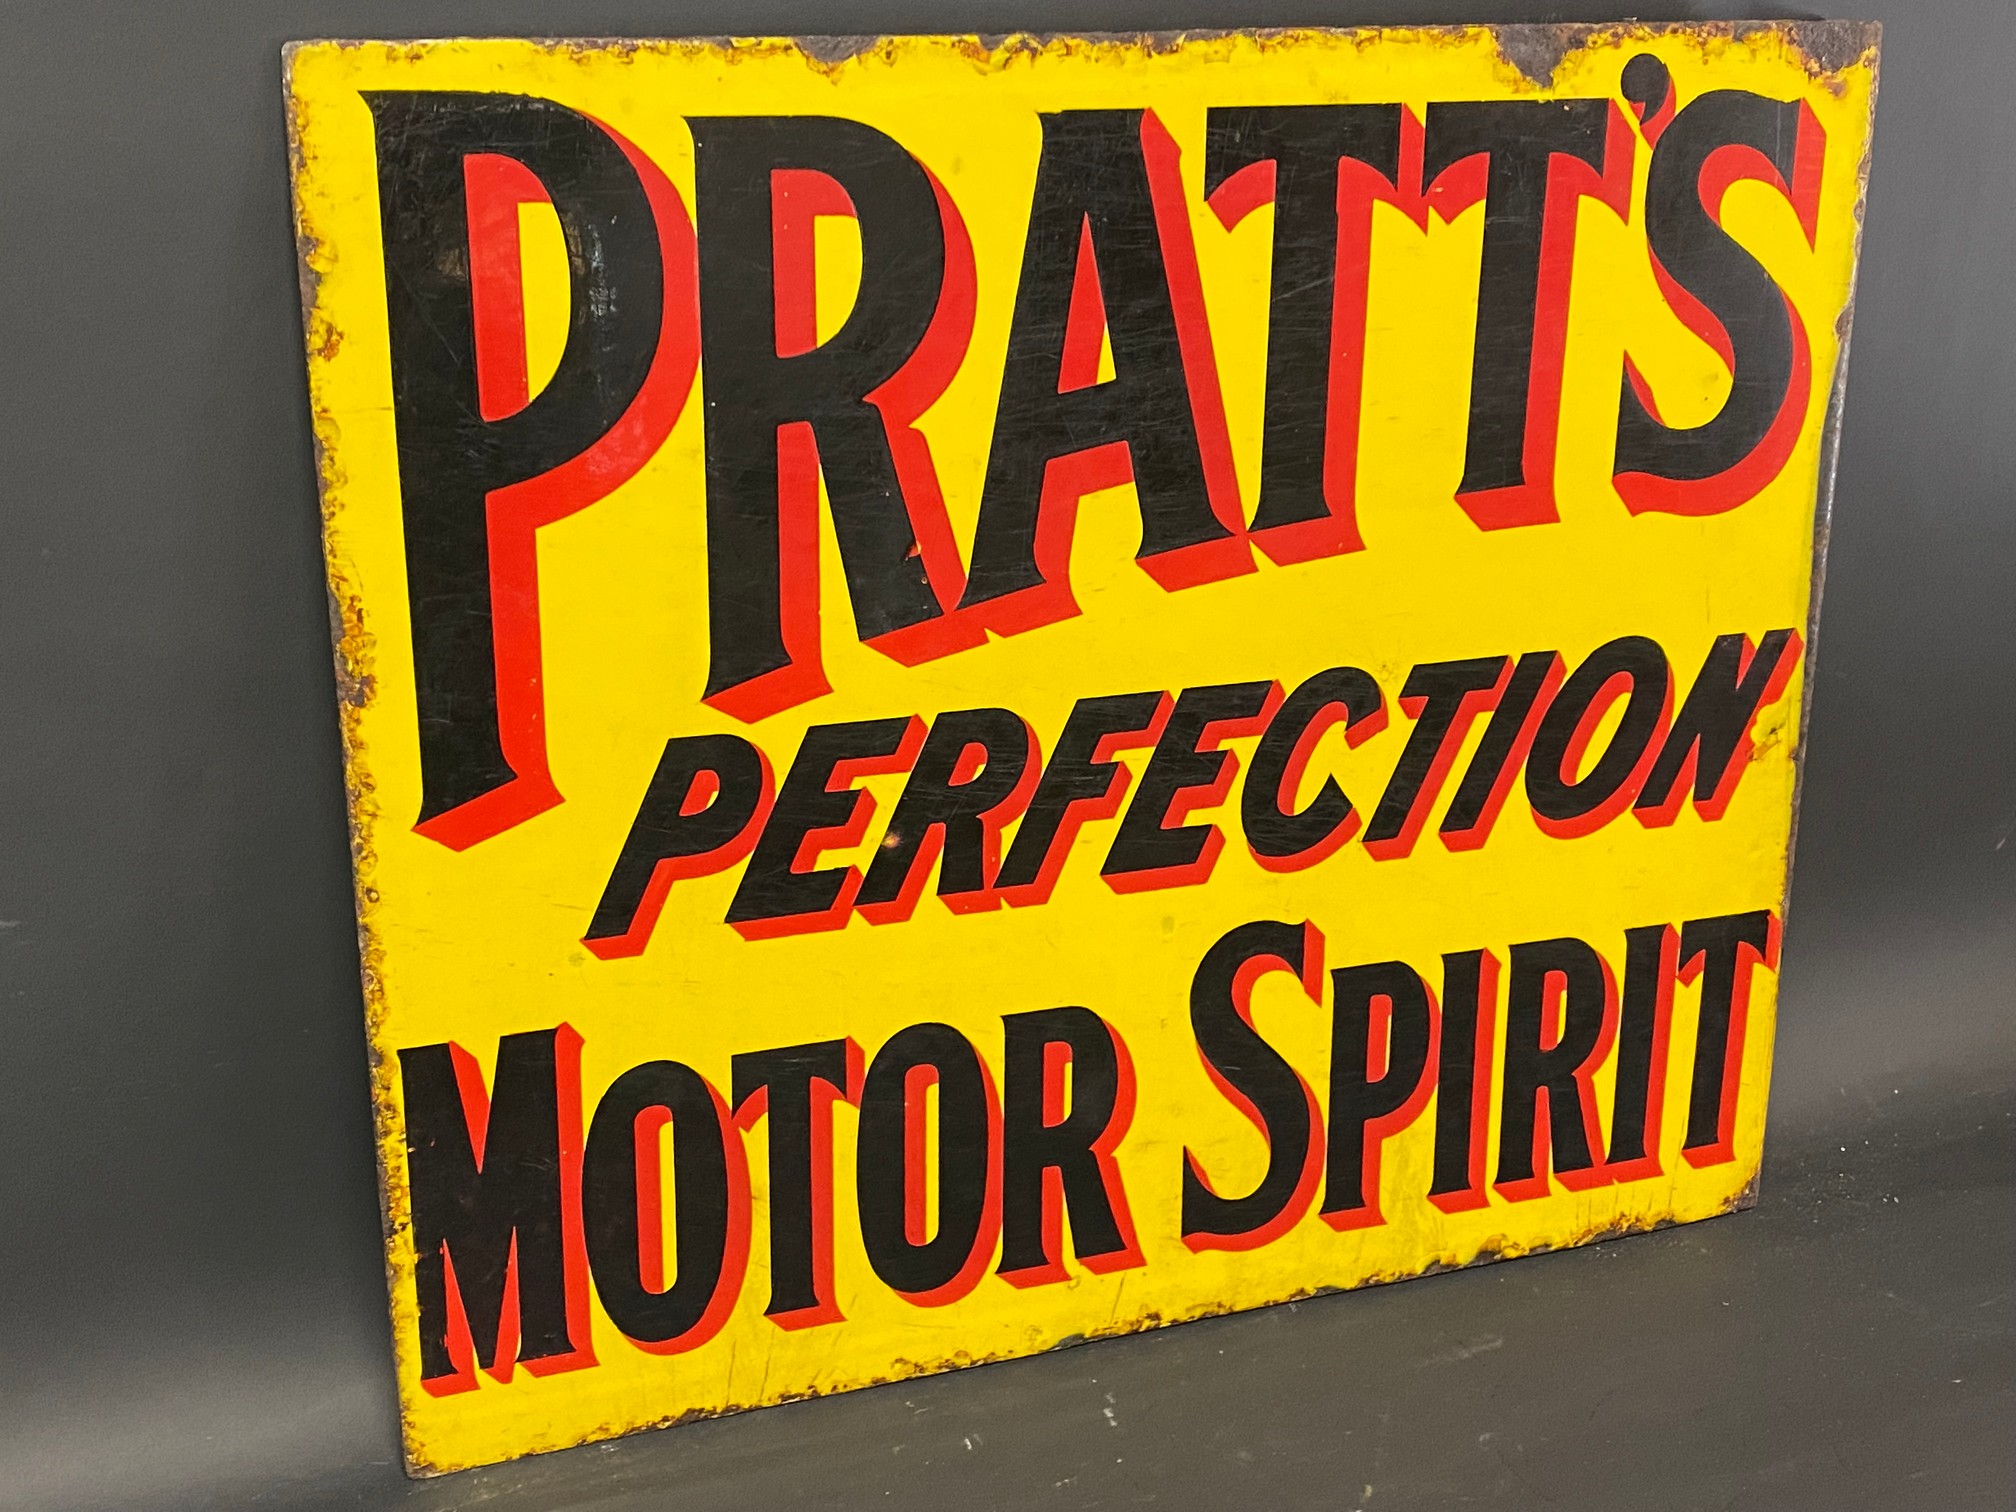 A Pratt's Perfection Motor Spirit double sided enamel sign by Bruton, 21 x 18". - Image 4 of 5